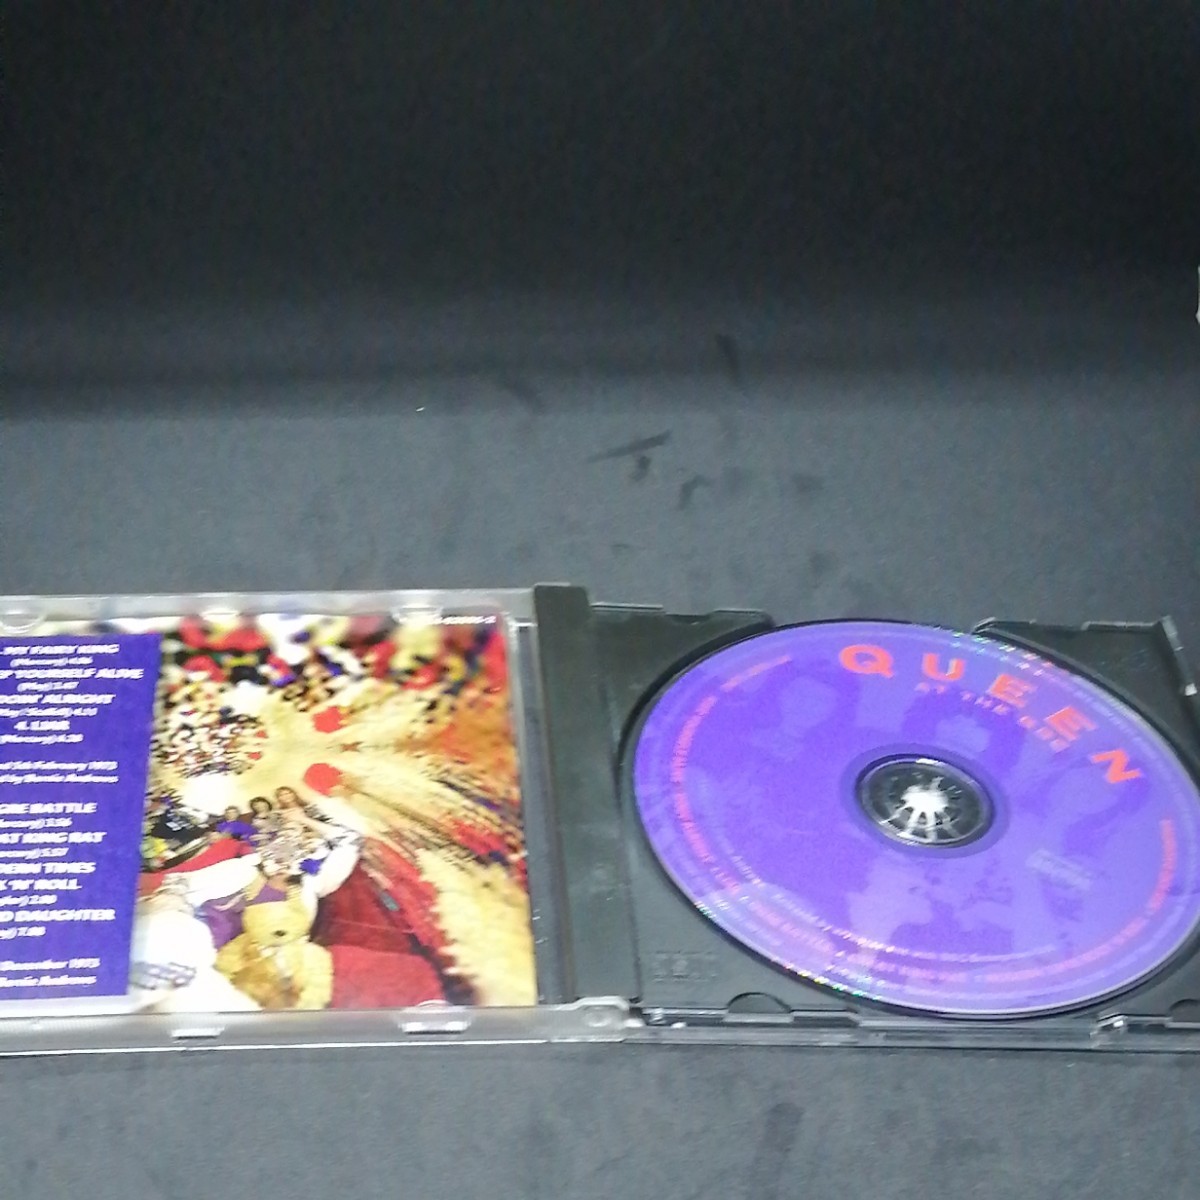 QUEEN AT THE BBC HR-62005-2 CD